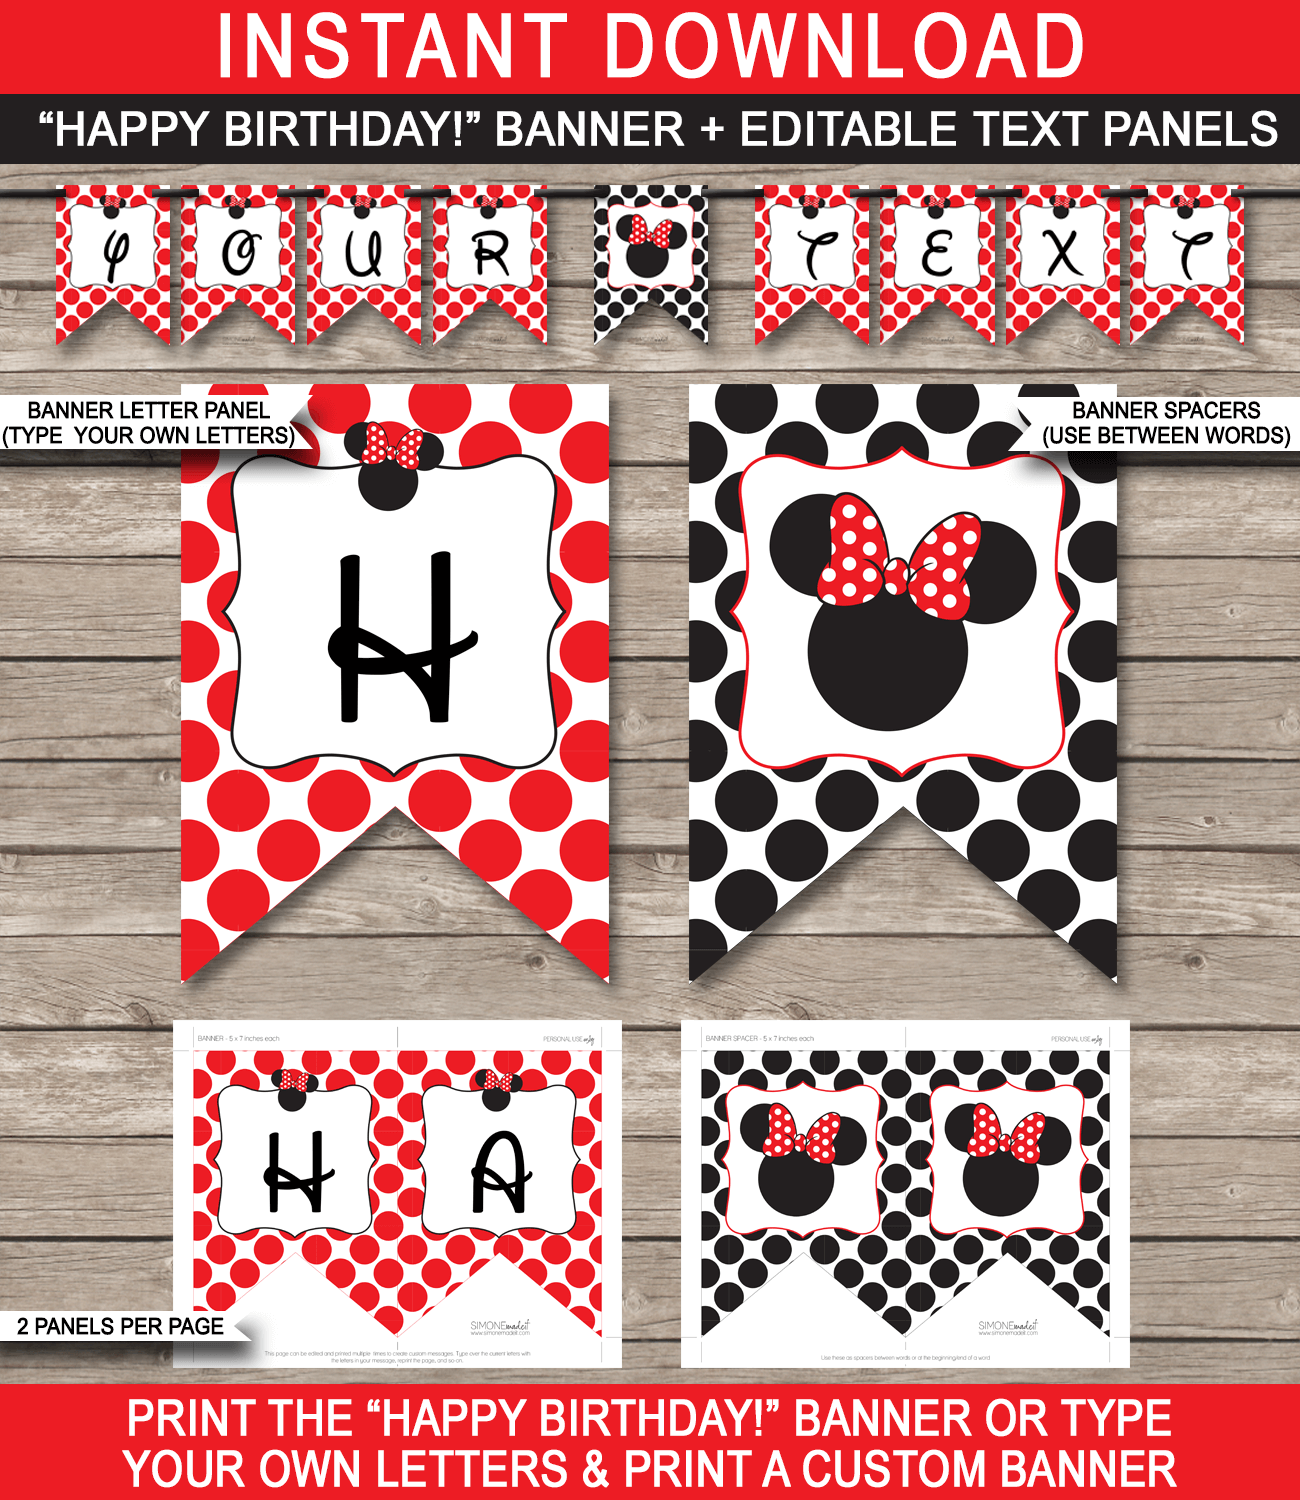 Minnie Mouse Birthday Banner Template - Red - Minnie Mouse Bunting - Happy Birthday Banner - Birthday Party - Editable and Printable DIY Template - INSTANT DOWNLOAD $4.50 via simonemadeit.com